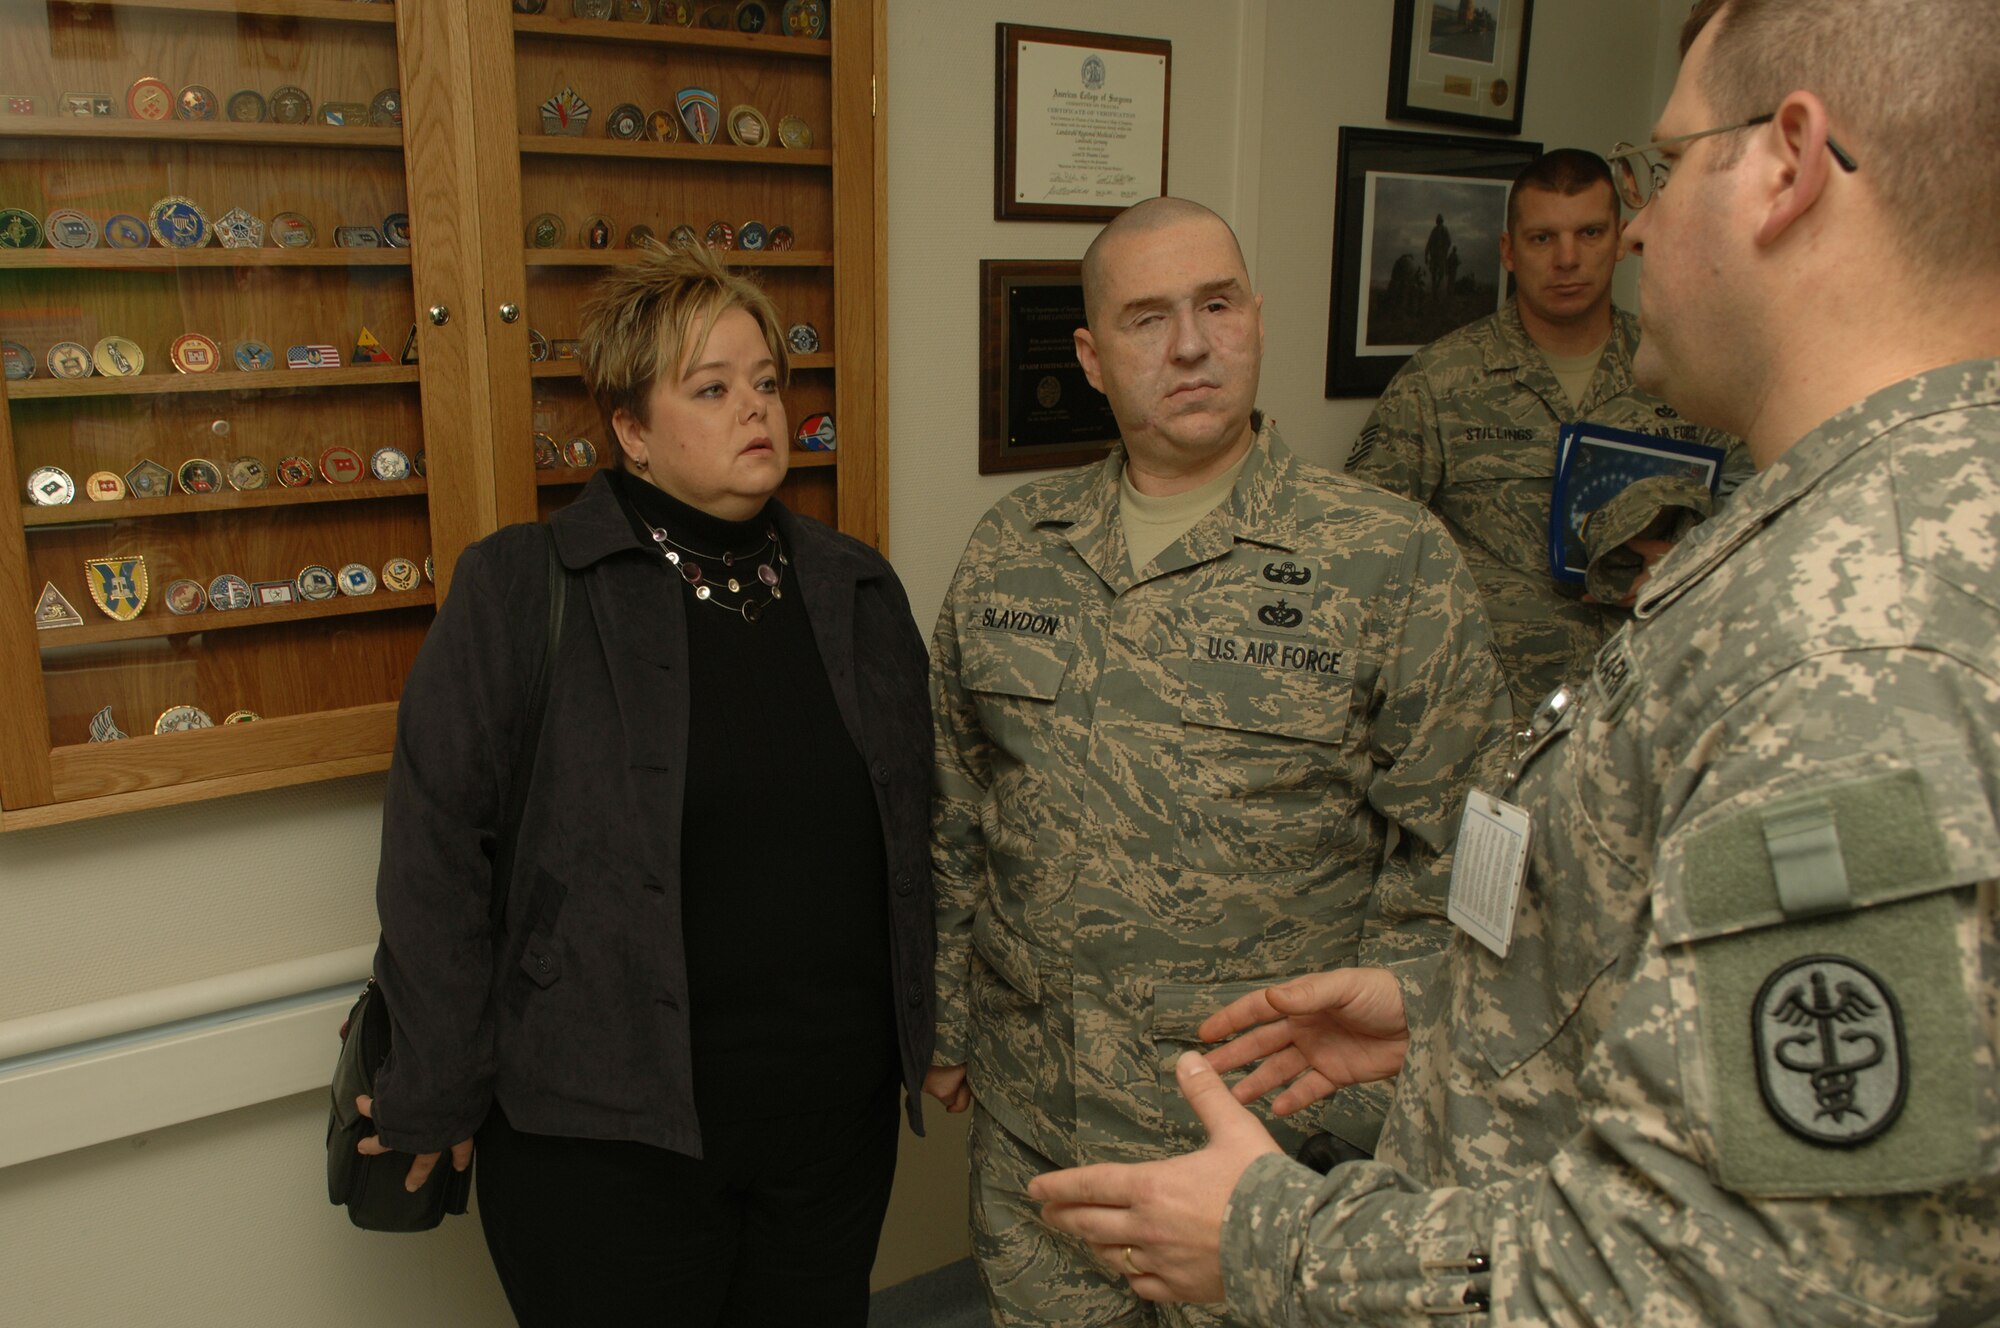 Army Staff Sgt. Daniel Bergles, Intensive Care Unit  noncommissioned officer in charge, explains their daily operations to Staff Sgt. Matthew Slaydon and his wife, Annette, Landstuhl Regional Medical Center, Germany, Nov. 21, 2008. Sgt. Slaydon was severely injured in Iraq 13 months ago during a deployment there as an explosive ordinance disposal technician and is visiting LRMC as part of a morale tour, following his recovery. (U.S. Air Force photo by Airman 1st Class Tony R. Ritter)